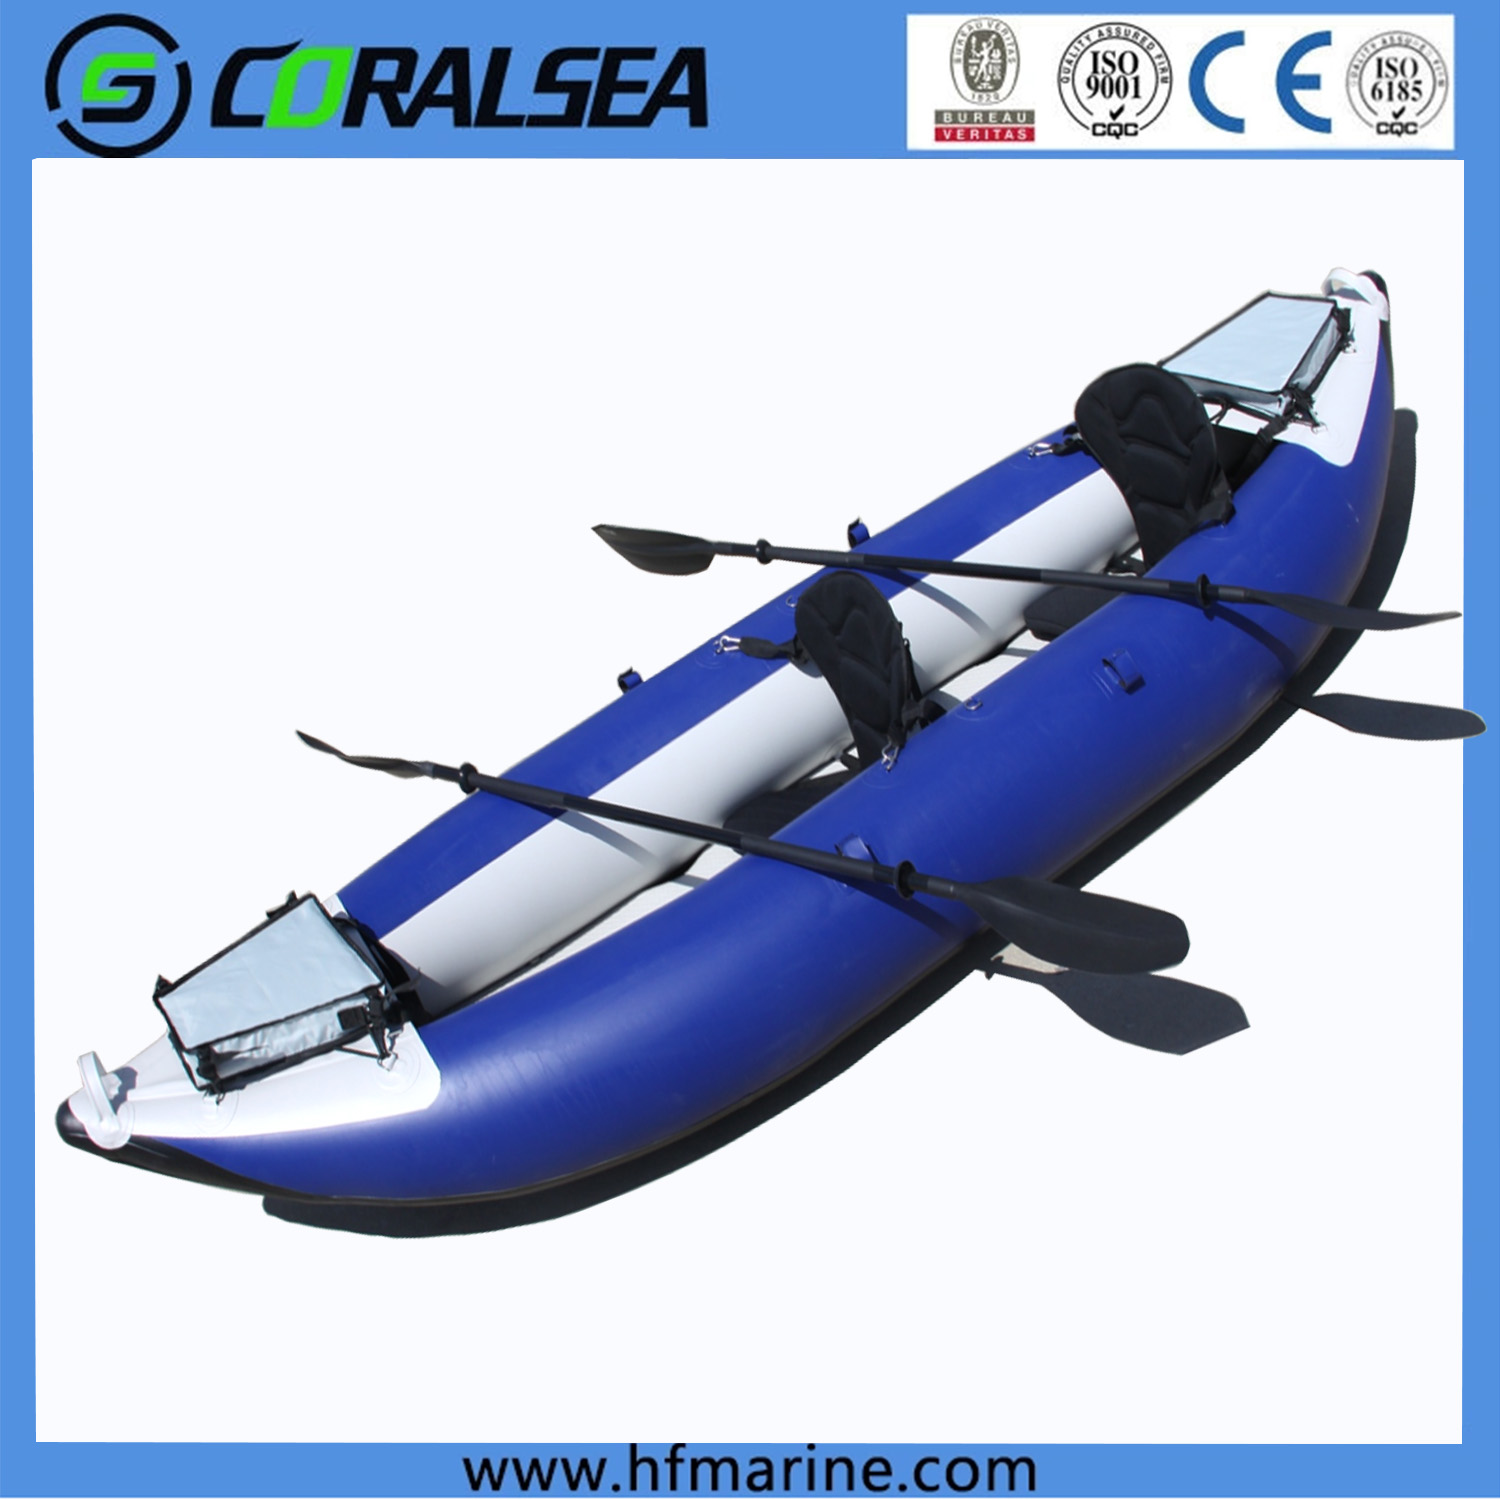 Wholesale Inflatable Pontoon Boat Accessories Factory – Tandem inflatable  fishing kayak white water explorer – CORALSEA Manufacturer and Supplier